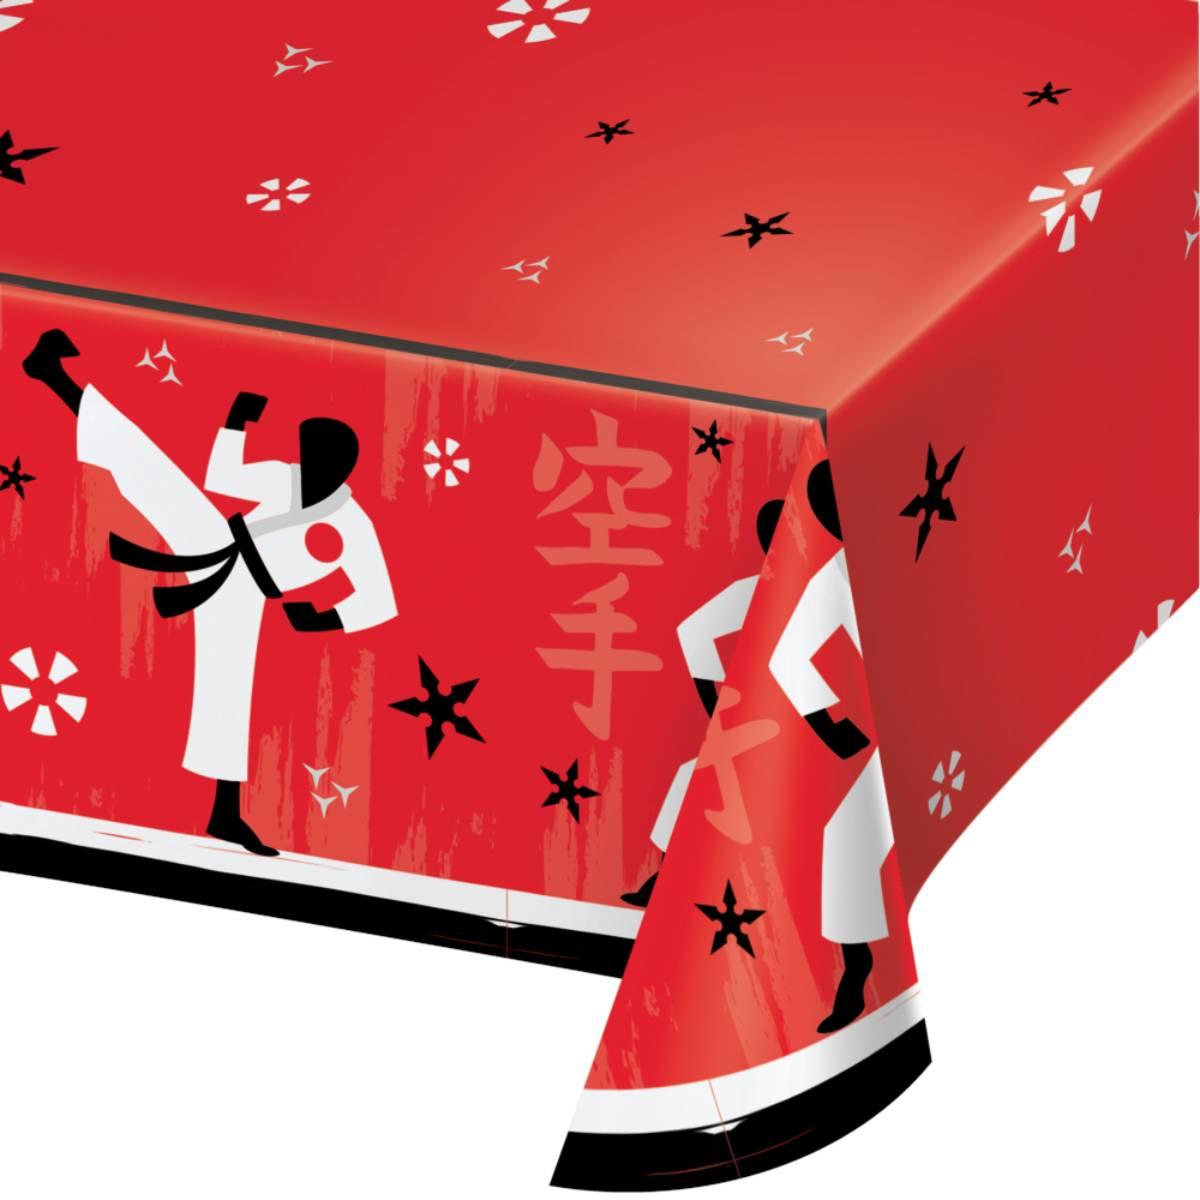 Karate Party Paper Tablecover 54" x 102" by Creative Converting 346246 available here at Karnival Costumes online party shop